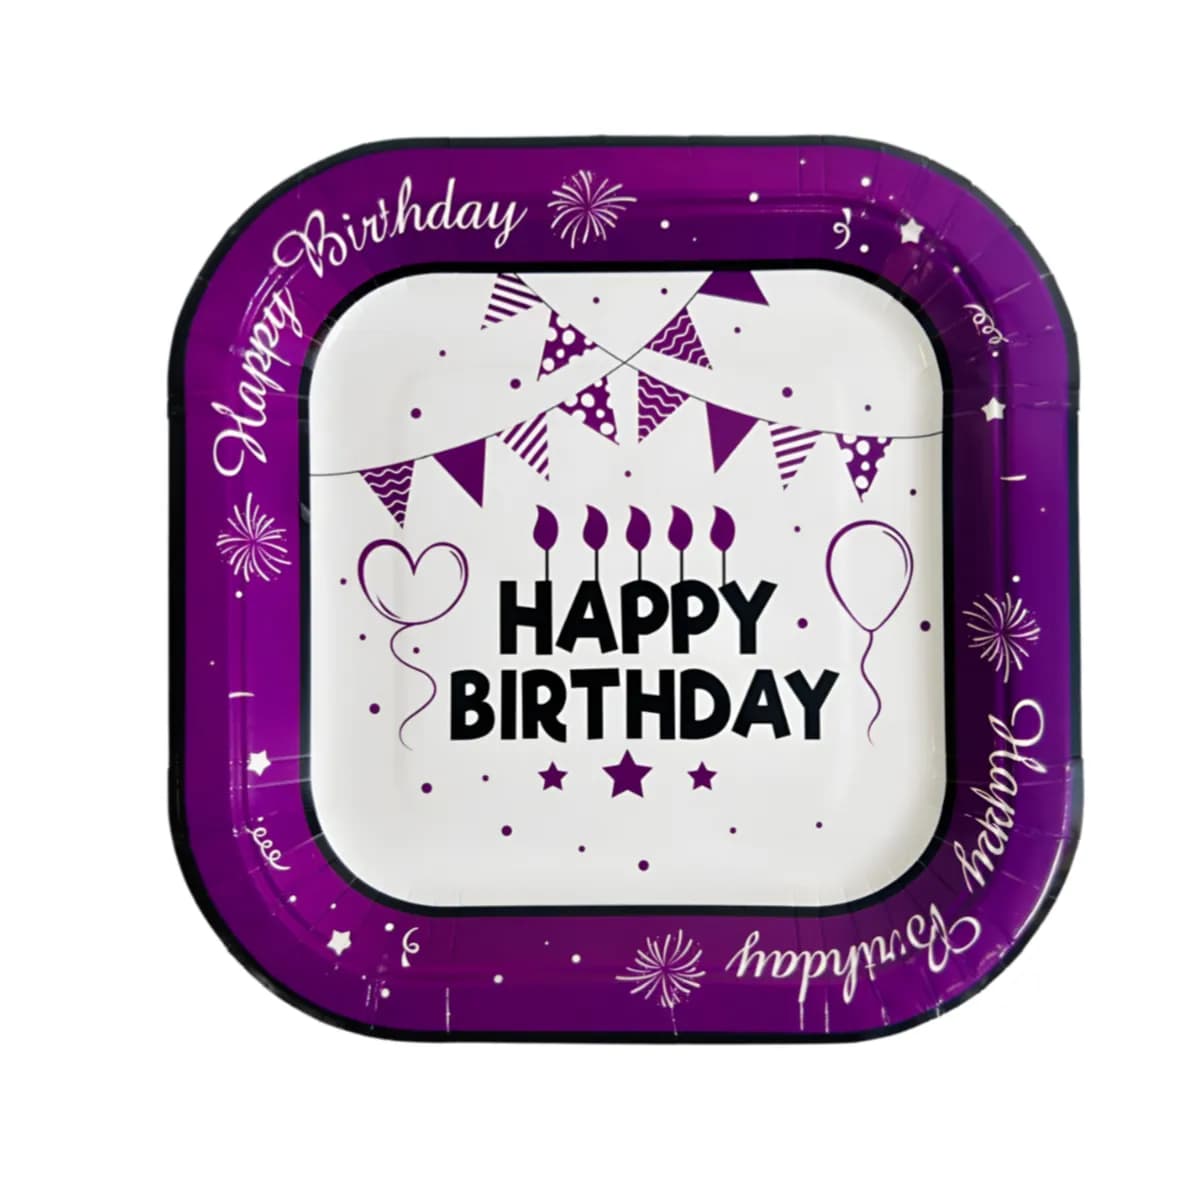 Happy Birthday Themed Birthday Party  Disposable Plates-Pack Of 6 Pieces-Small Size - (PIGC210)